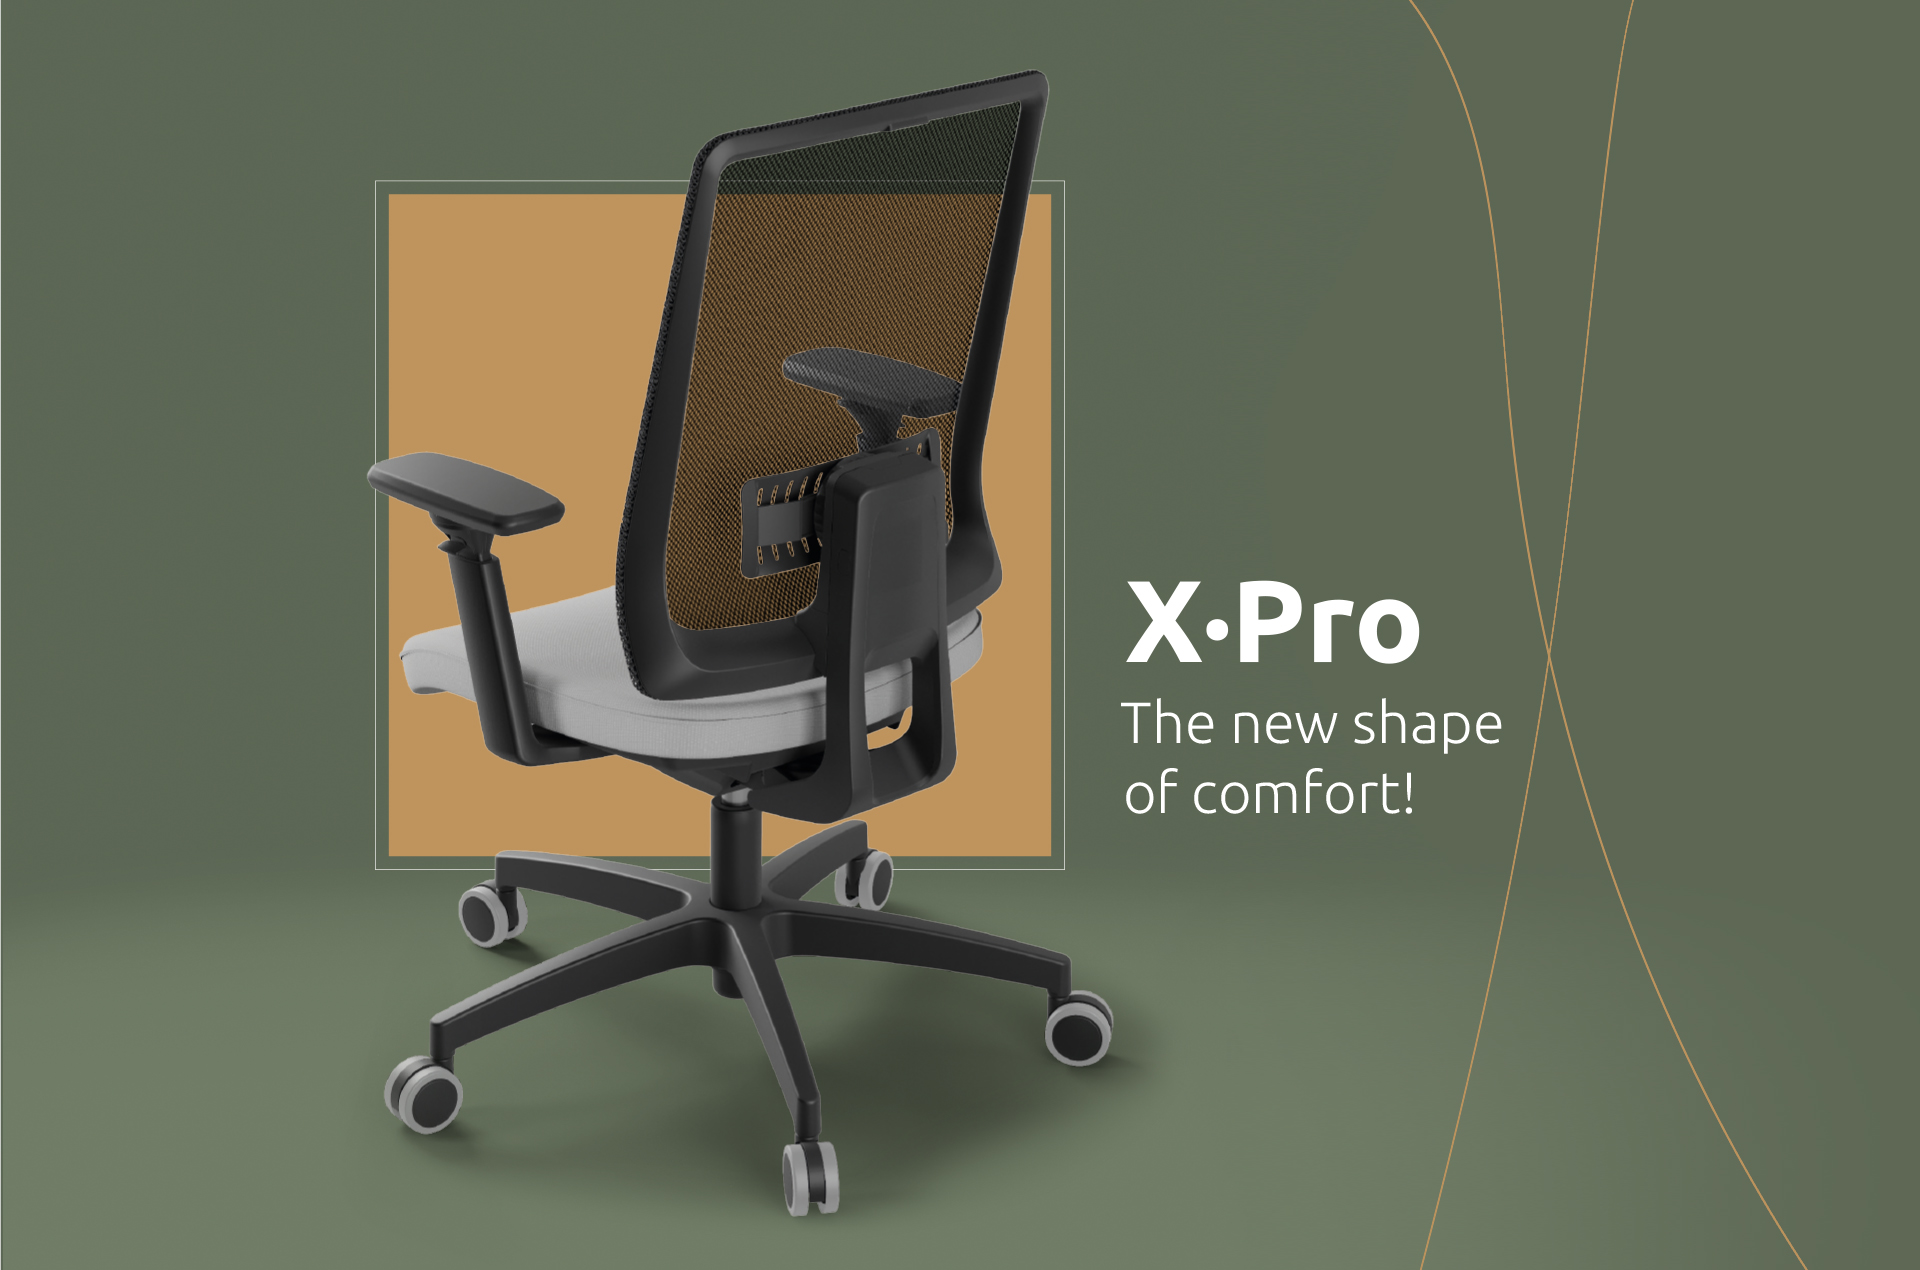  xpro-the-new-shape-of-comfort